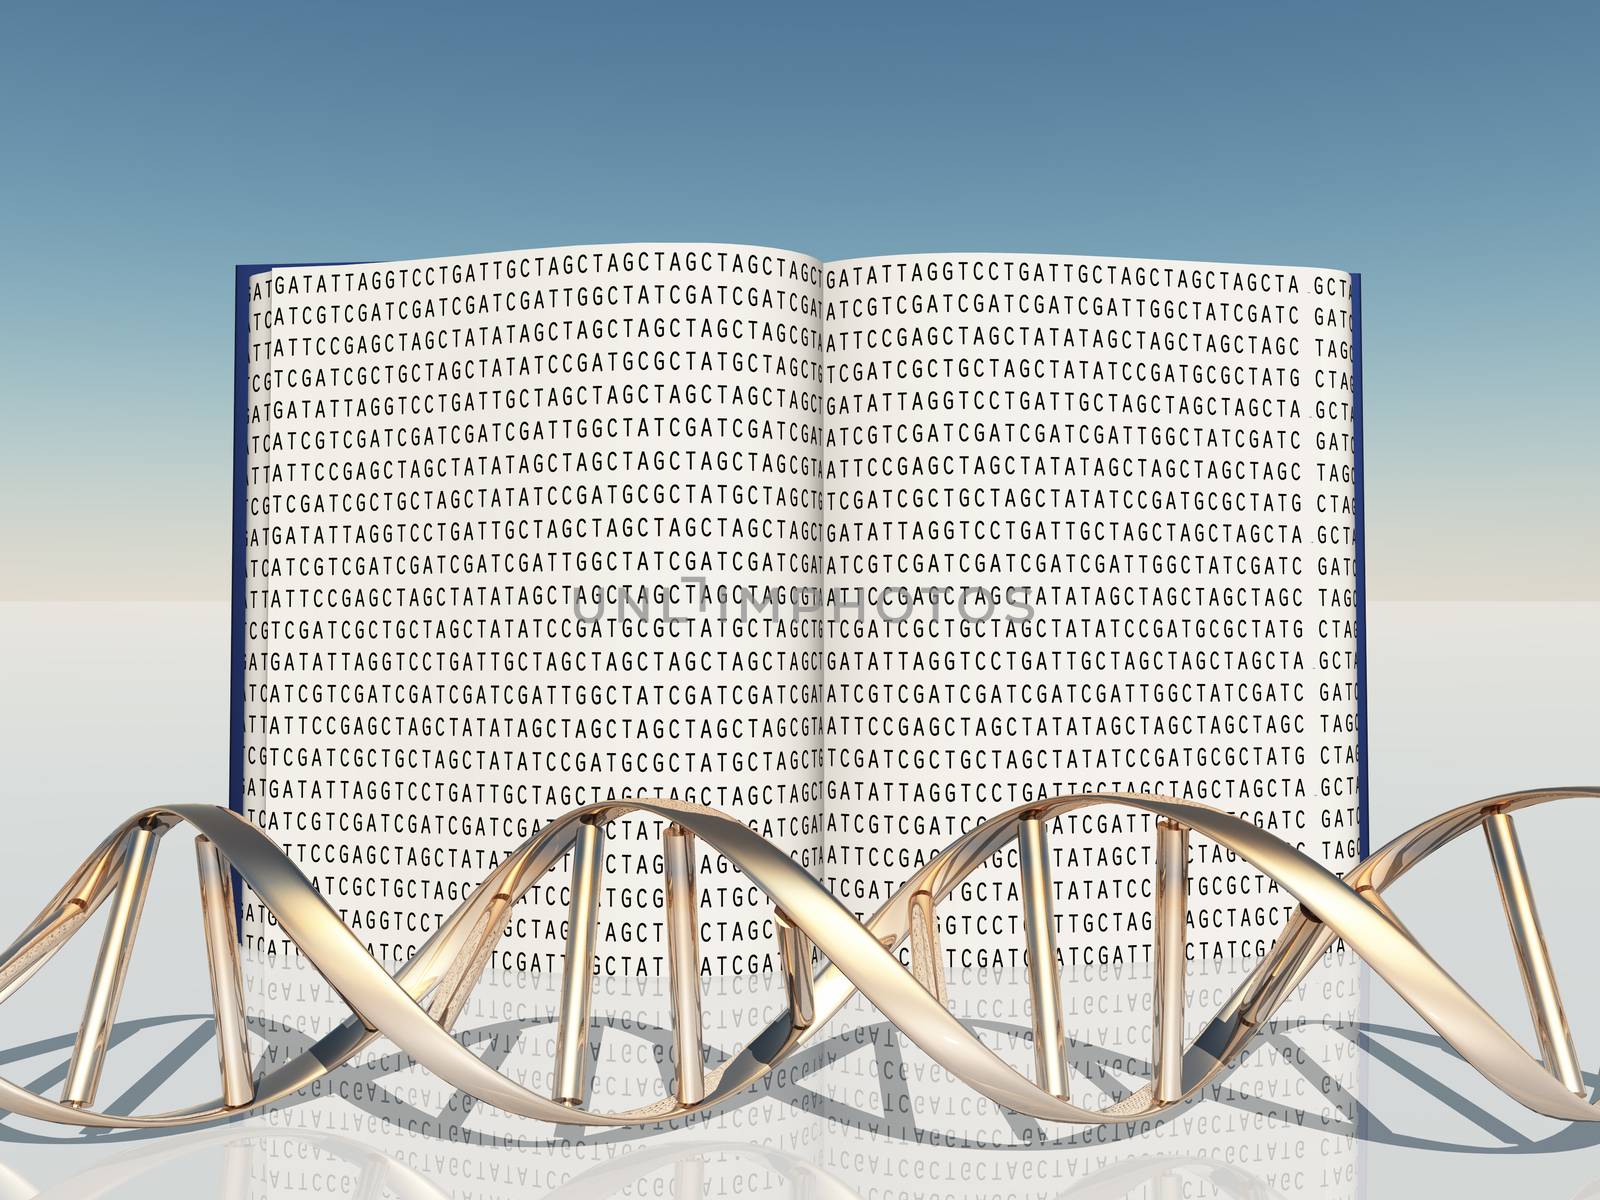 Book with Gentic Code and Strand of DNA. 3D rendering